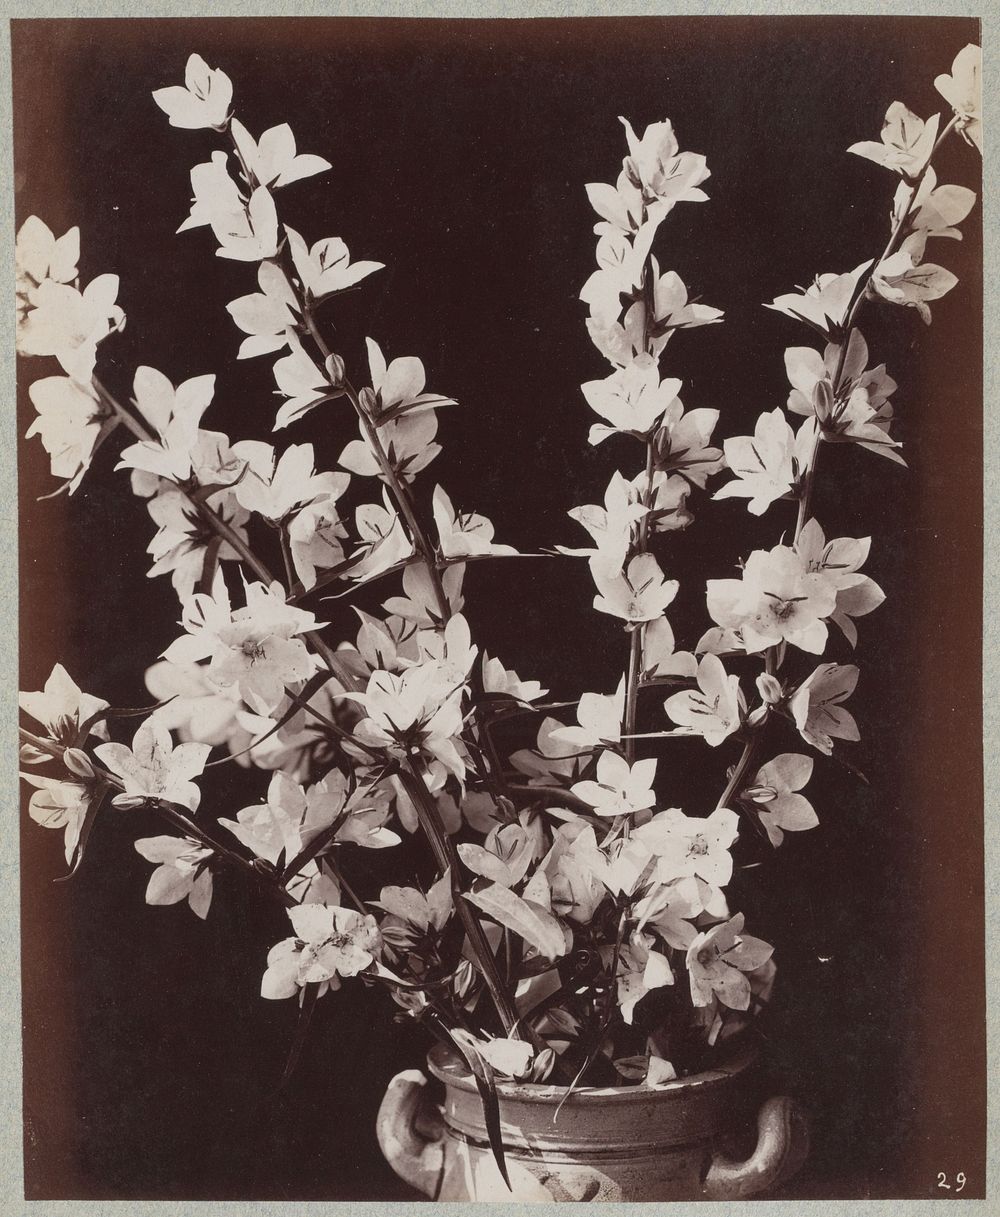 Bloemstudie met Keulse pot (c. 1875 - c. 1895) by Charles Aubry, A Calavas and Bolotte and Martin